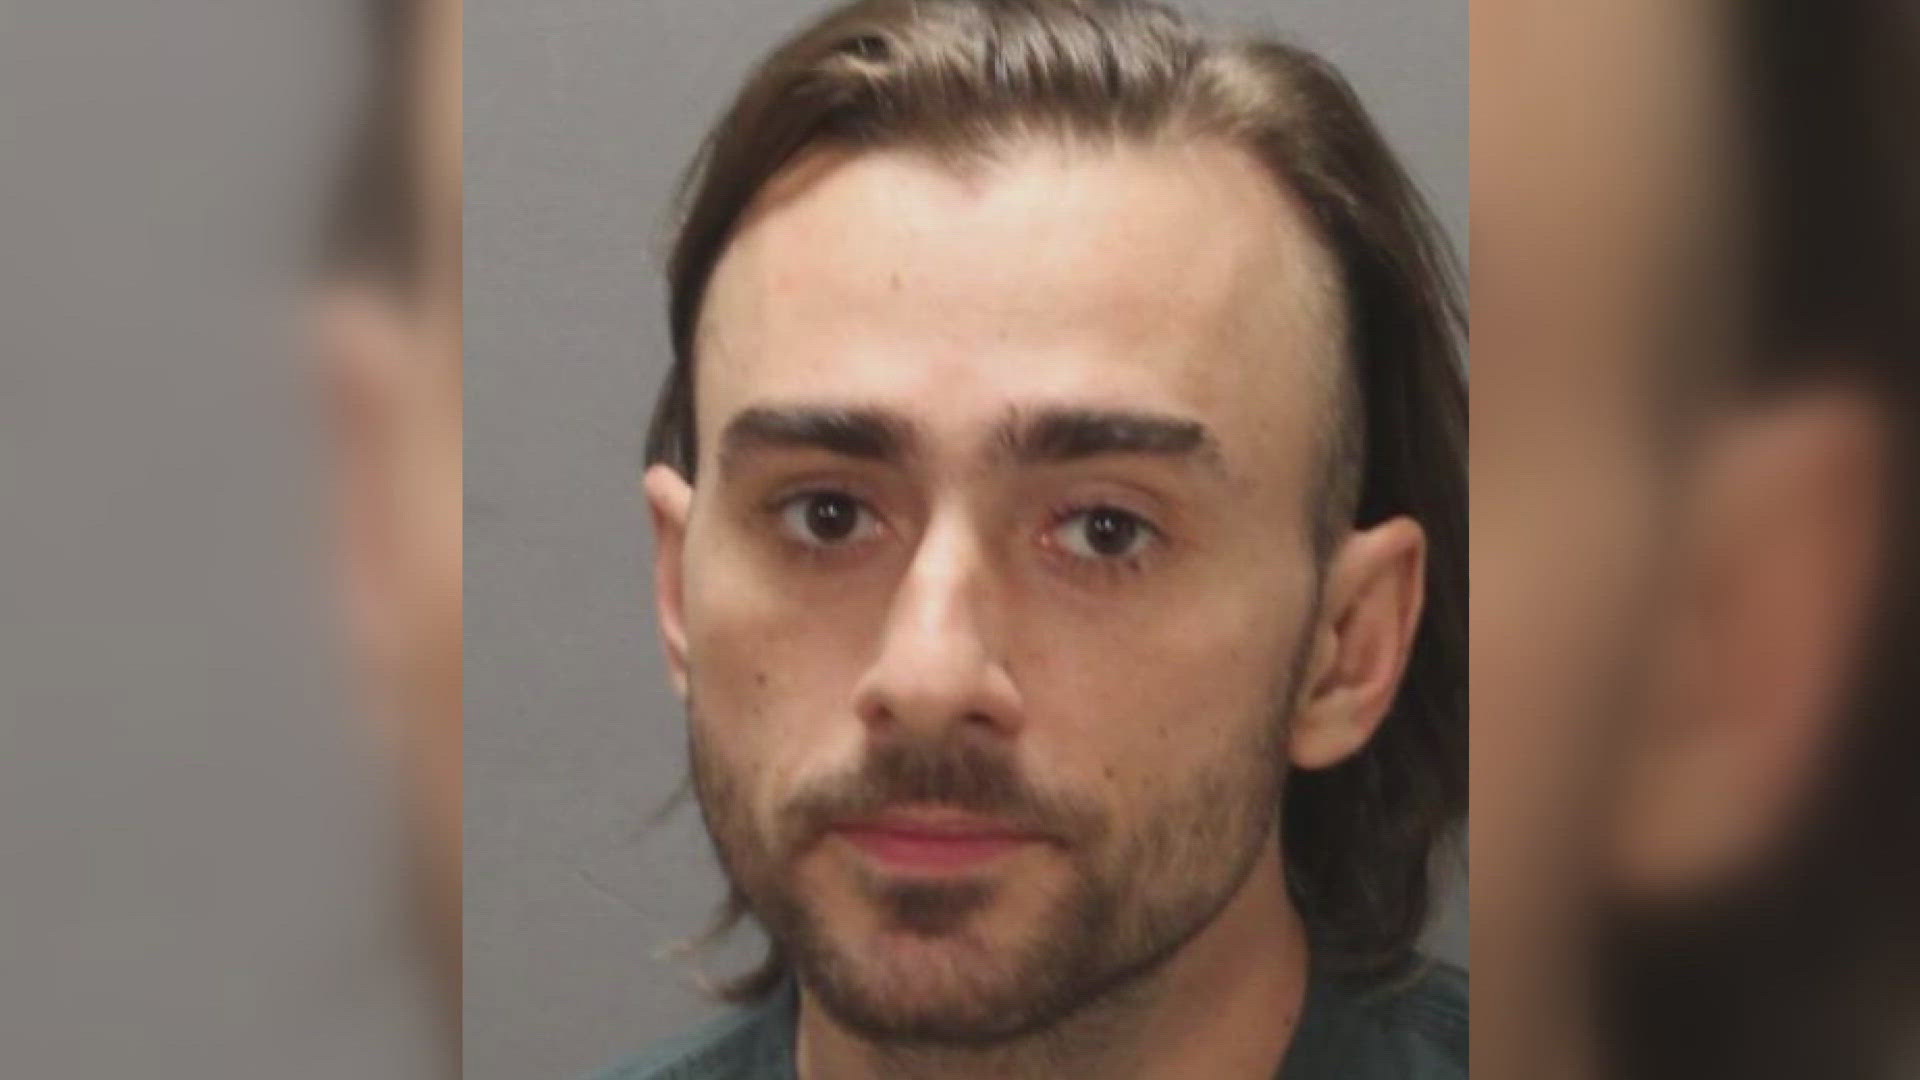 Frederick Pierallini, 27, committed two federal hate crimes by attacking two Black women at a convenience store and on a sidewalk with a gun in September 2022.